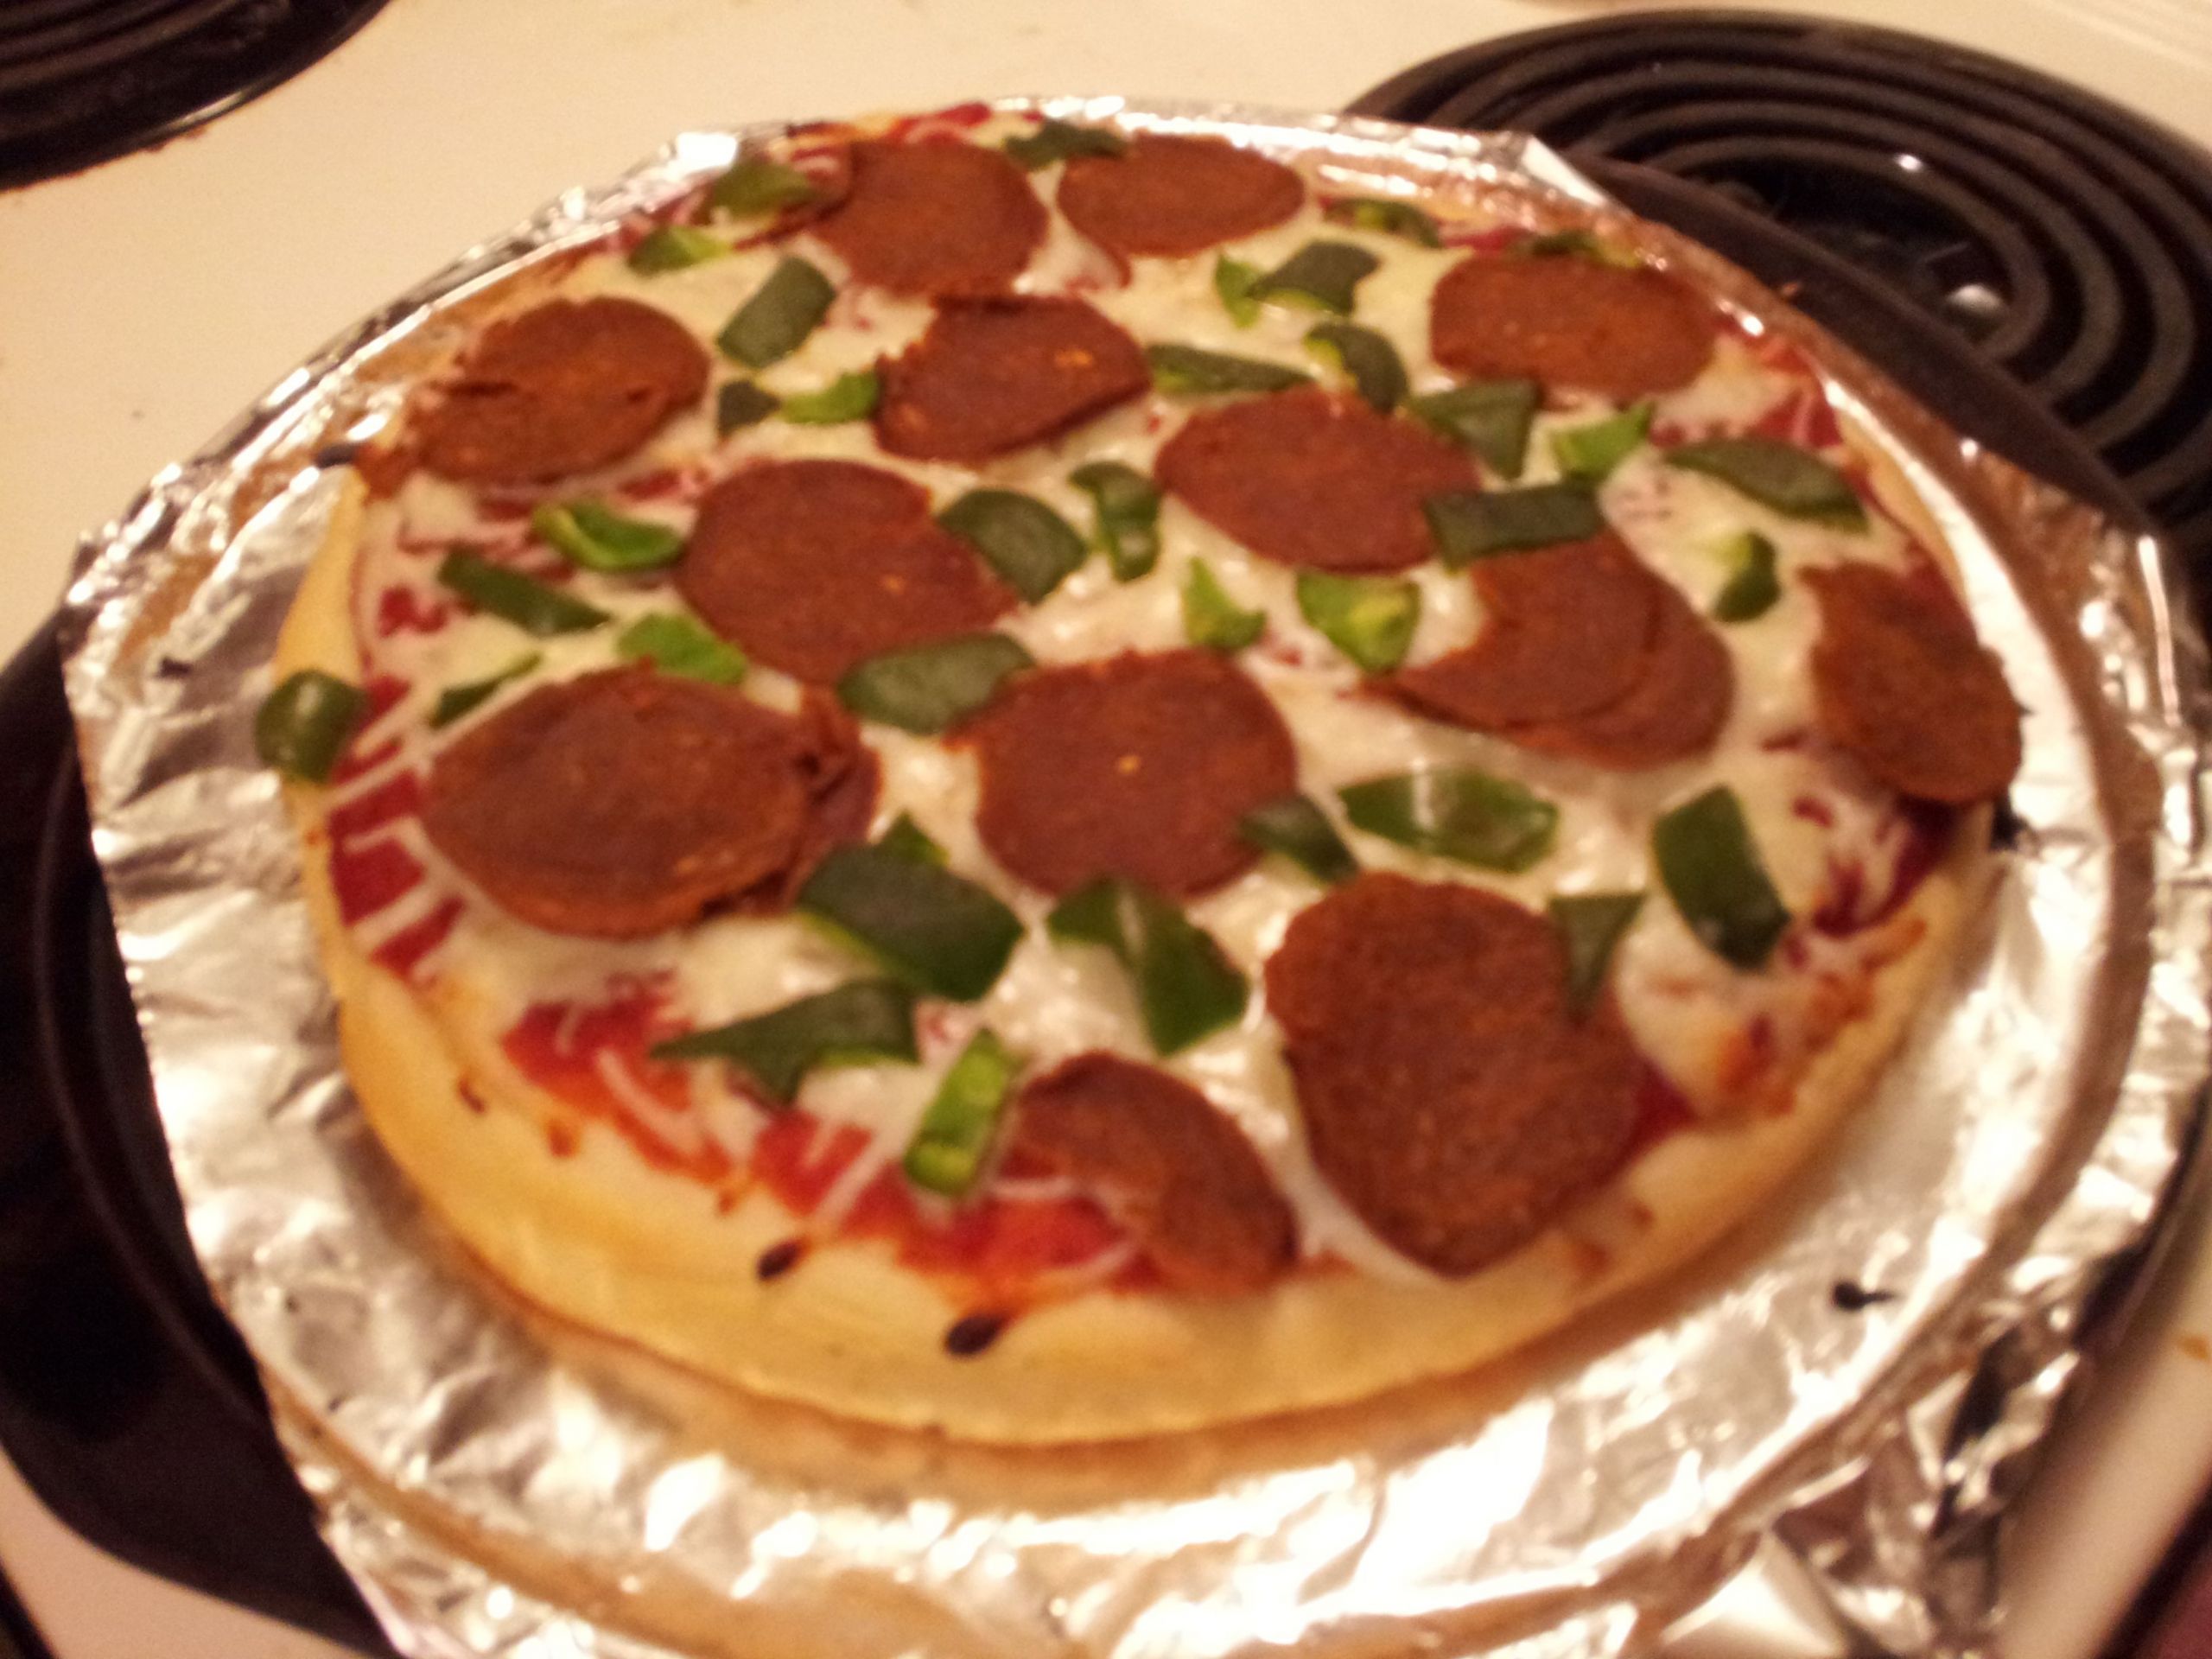 Tofurky Pepperoni Pizza
 Pizza with Tofurky brand vegan pepperoni and green peppers